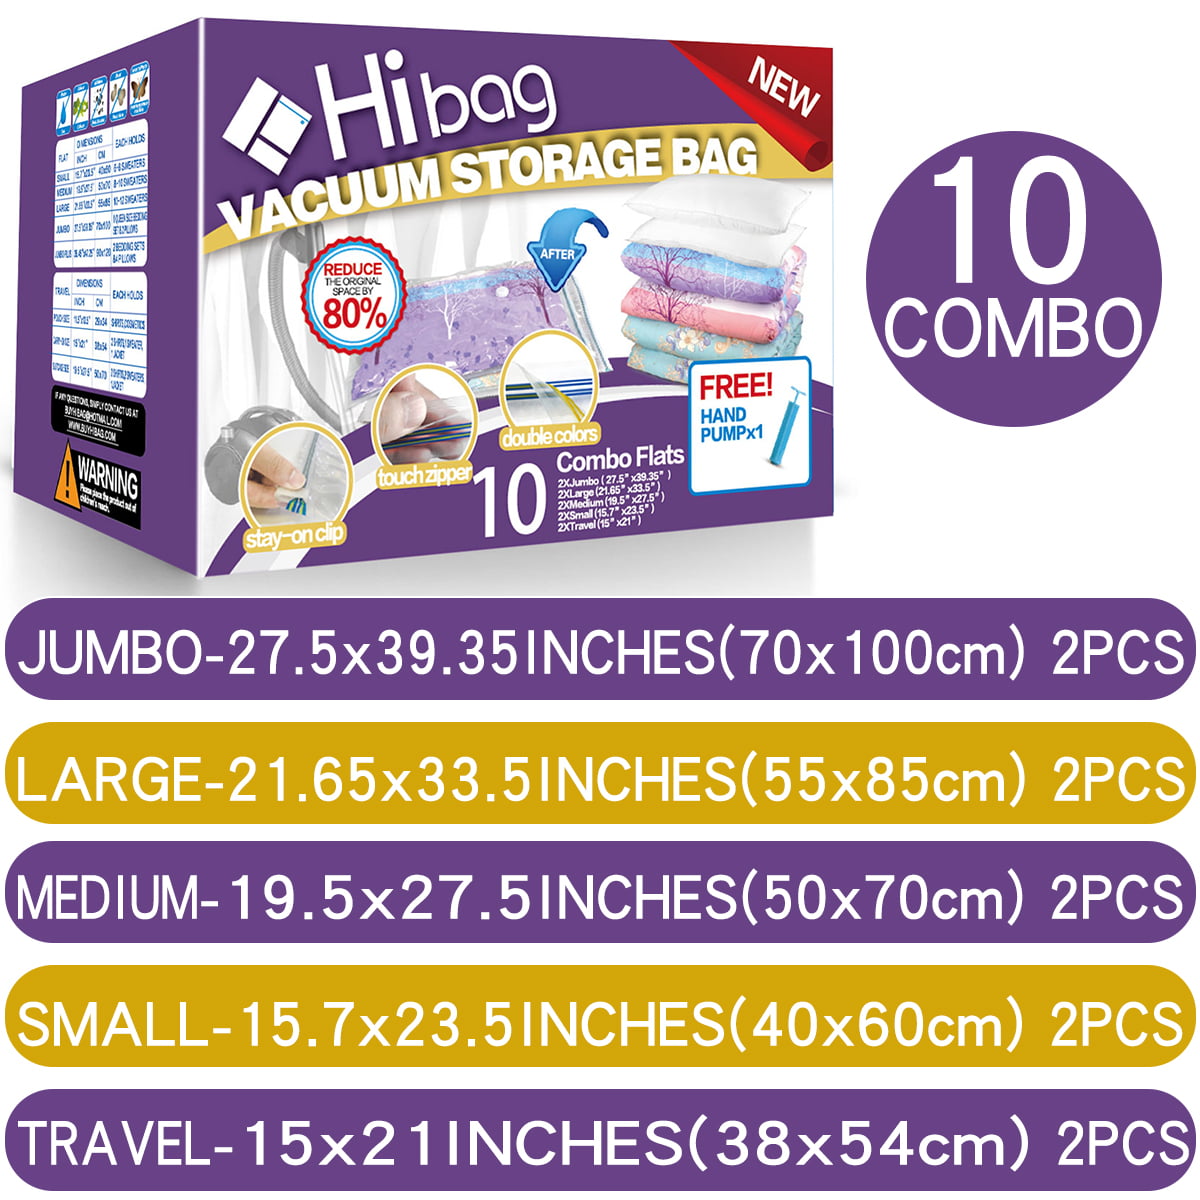 Hibag 12 Travel Compression Bags, Hibag 12-Pack Roll-up Space